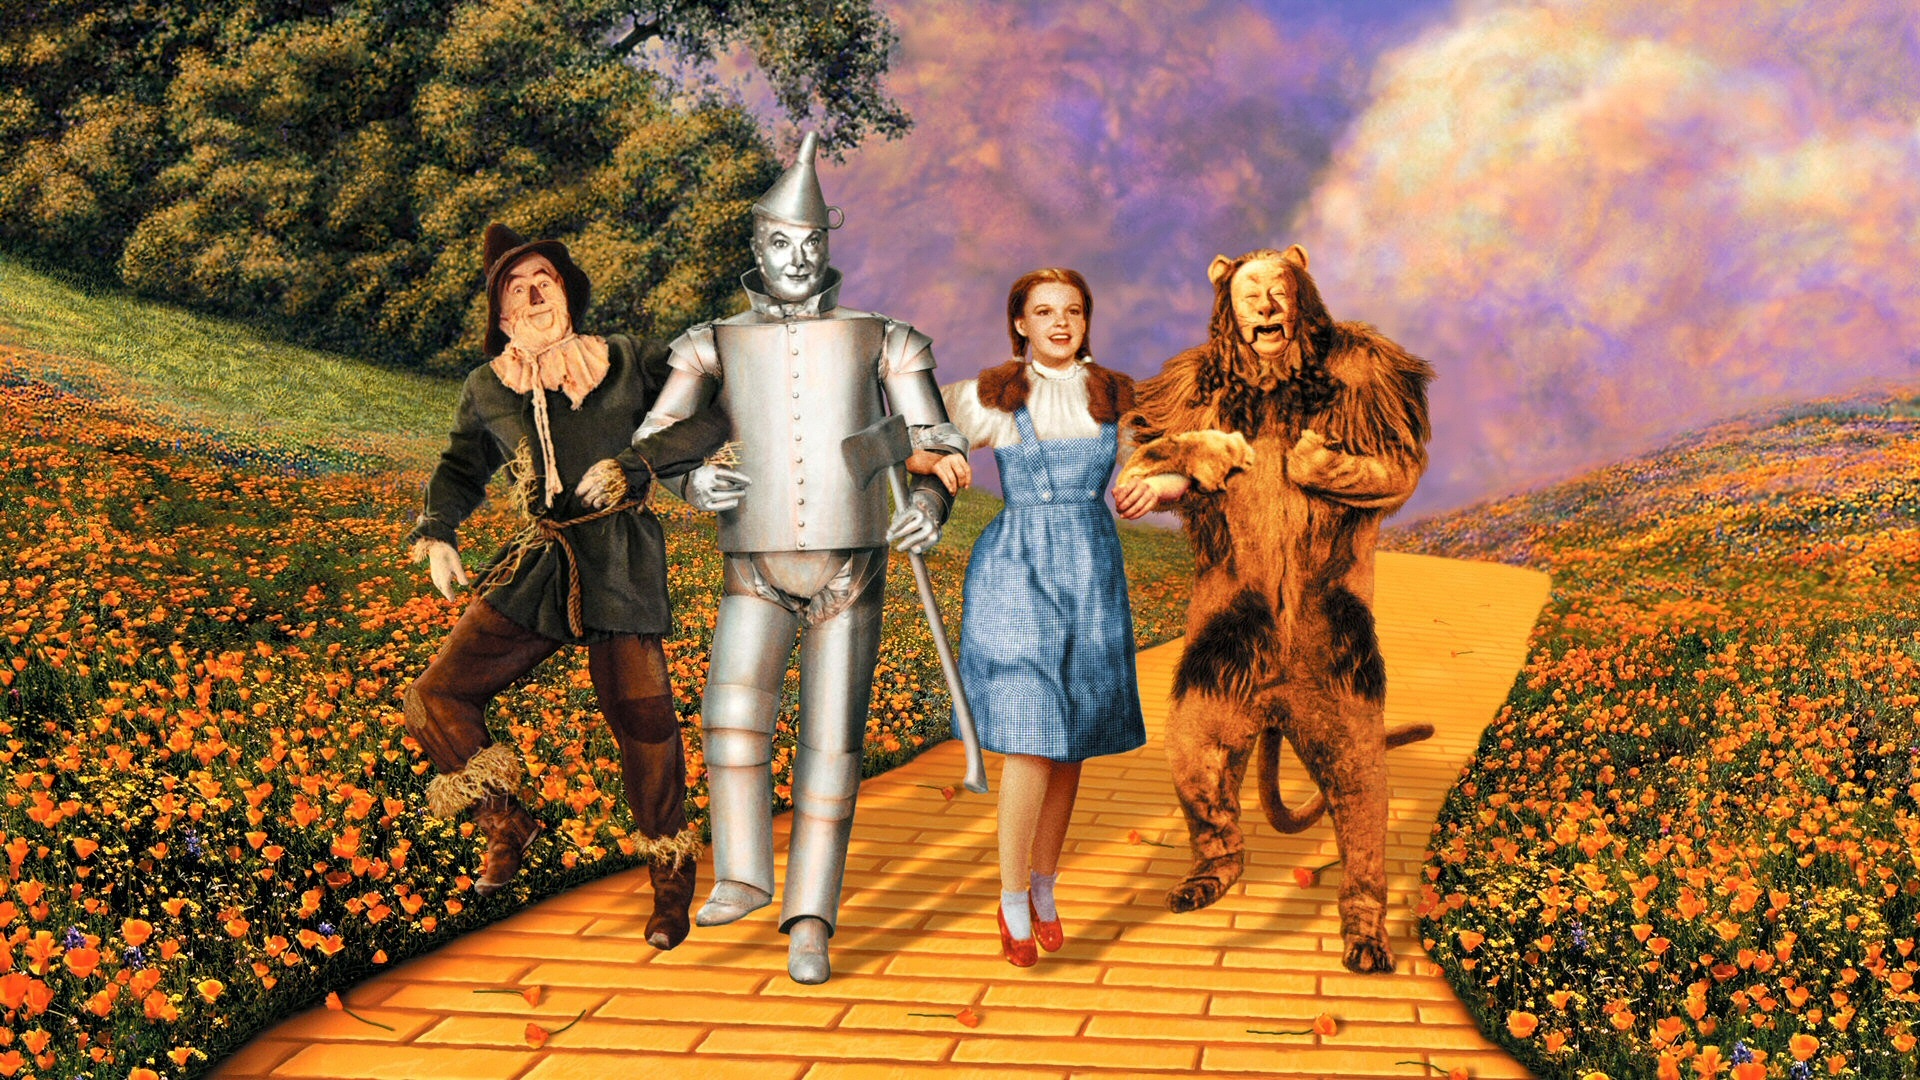 50+] Free Wizard of Oz Wallpaper on